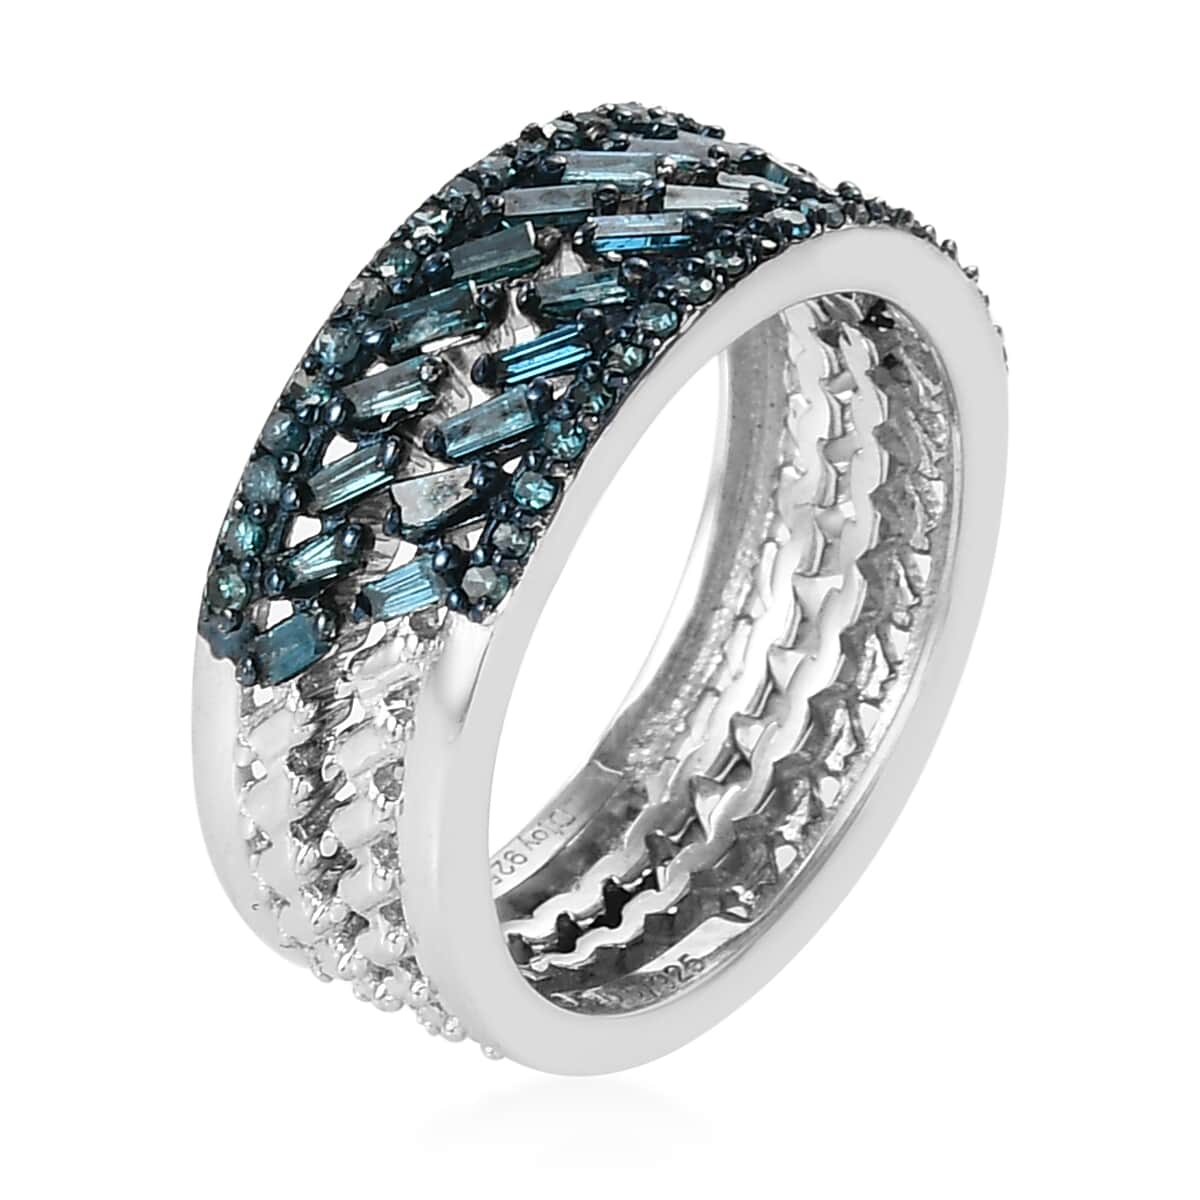 11th-may-tlv-diamond-stackable-band-ring-in-platinum-over-sterling-silver-size-11.0-0.50-ctw image number 4